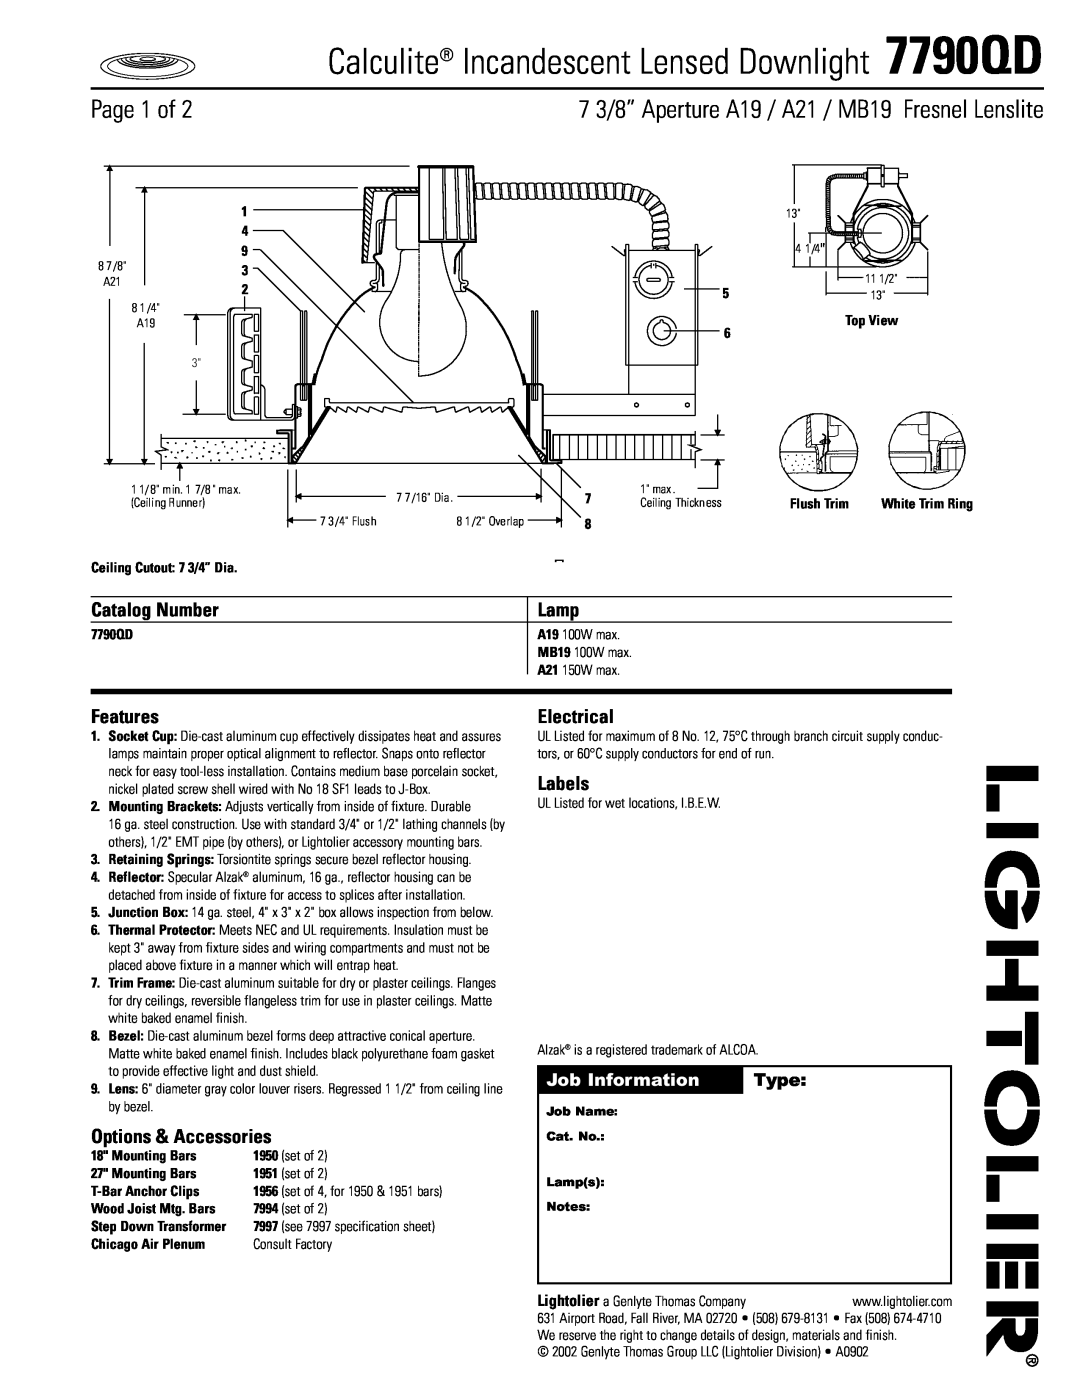 Lightolier specifications Calculite Incandescent Lensed Downlight 7790QD, Page 1 of, Job Information, Type, Lamp 